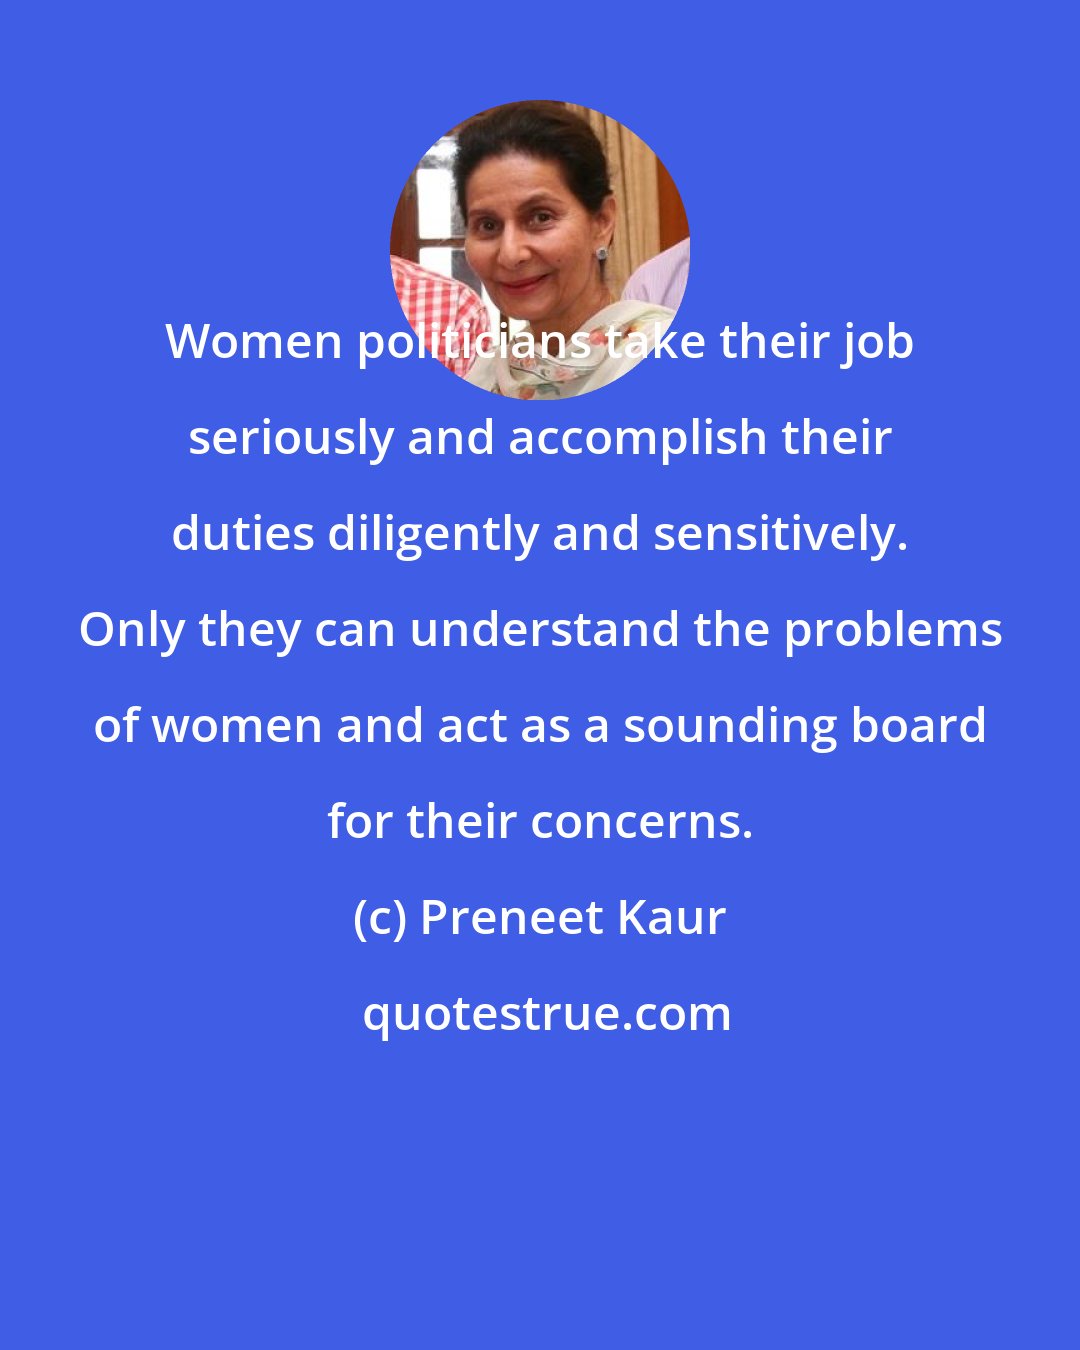 Preneet Kaur: Women politicians take their job seriously and accomplish their duties diligently and sensitively. Only they can understand the problems of women and act as a sounding board for their concerns.